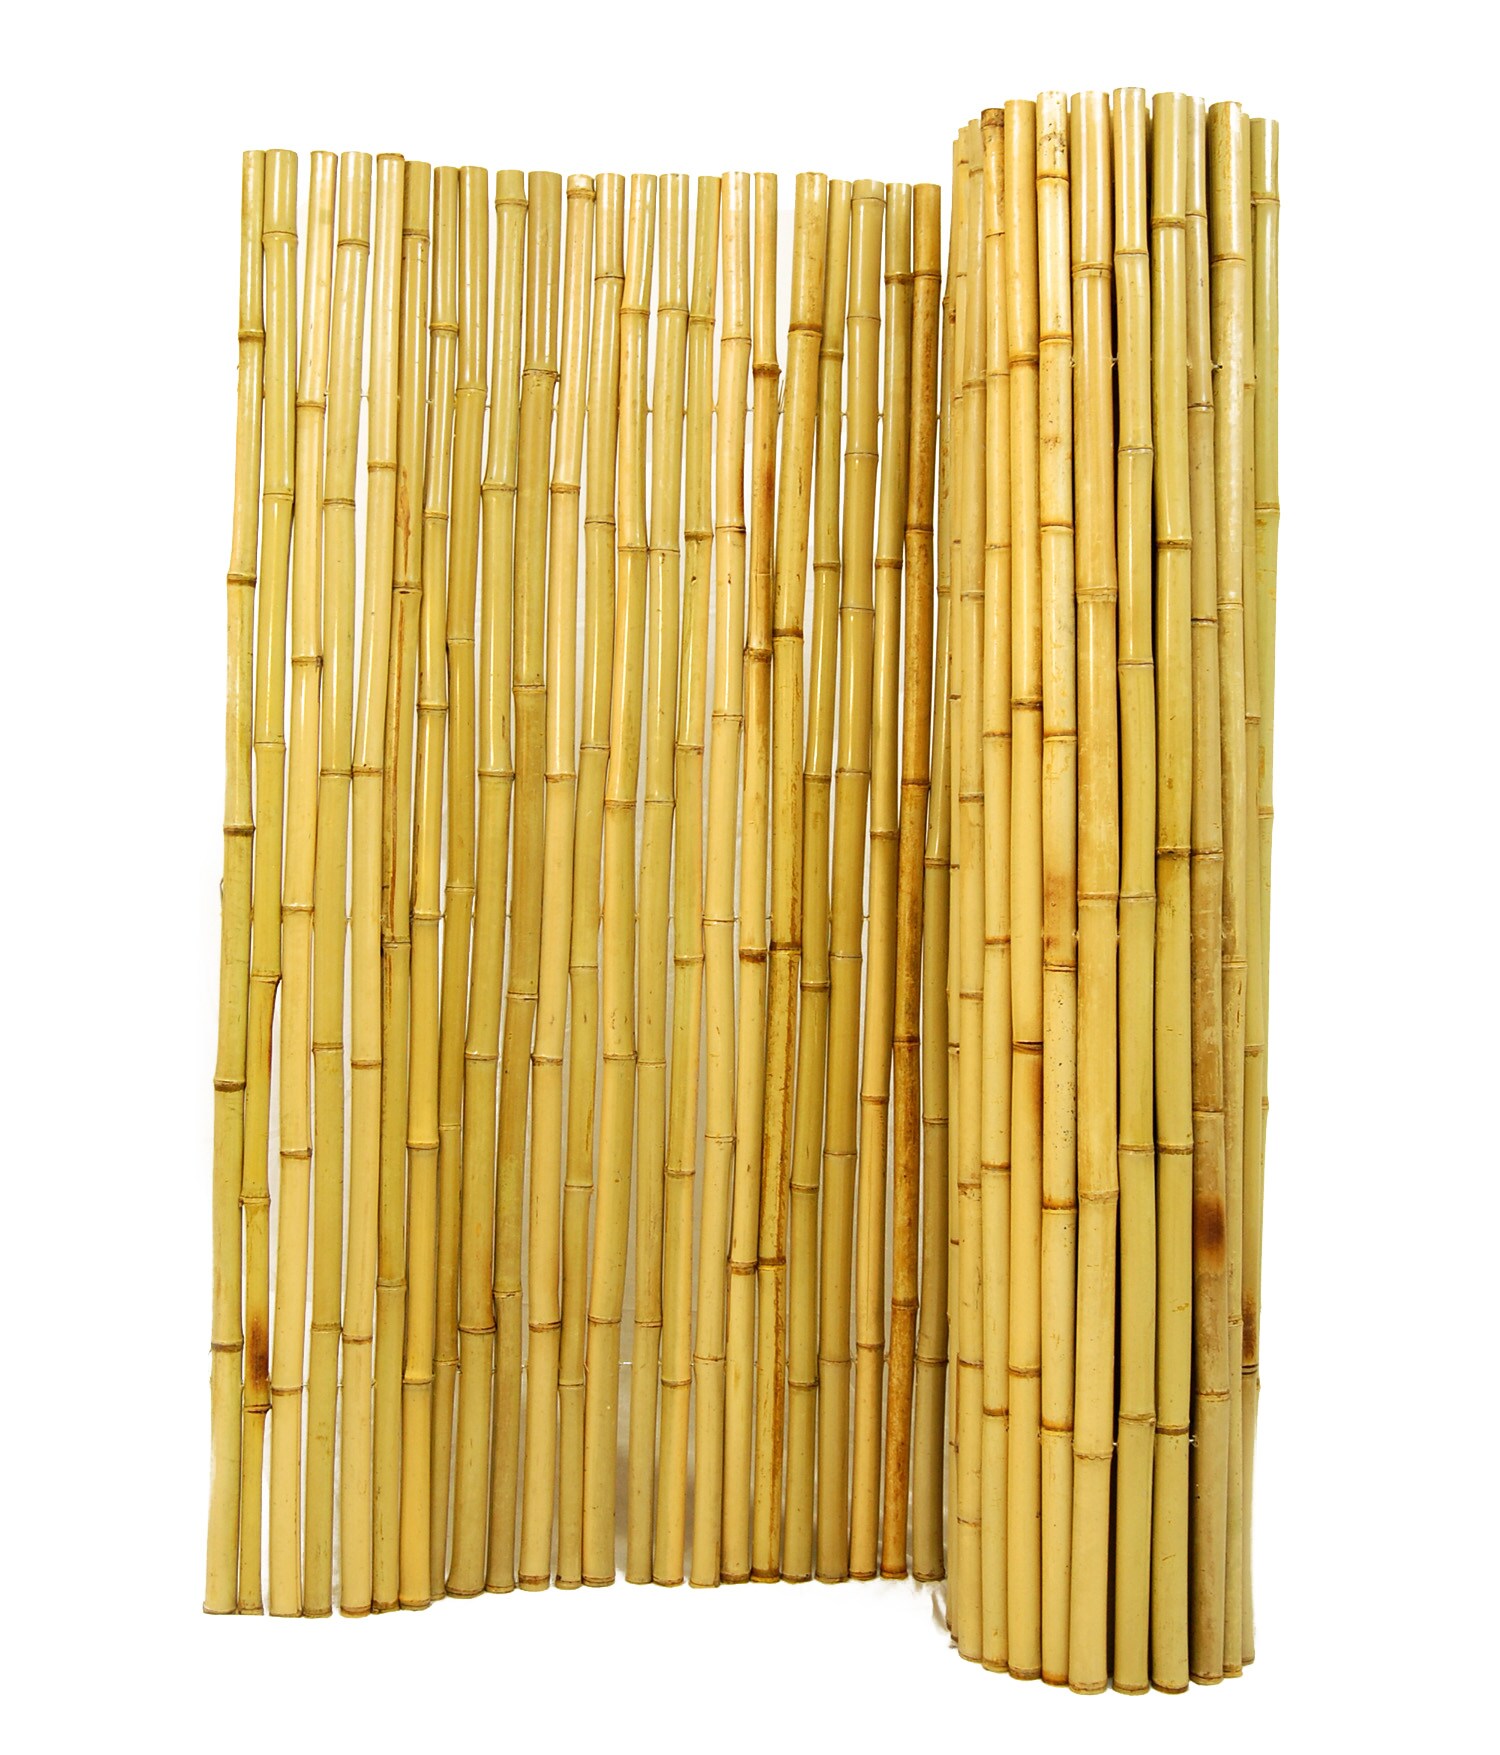 Backyard X-Scapes 17-in W x 17-in H Natural Bamboo Outdoor Privacy